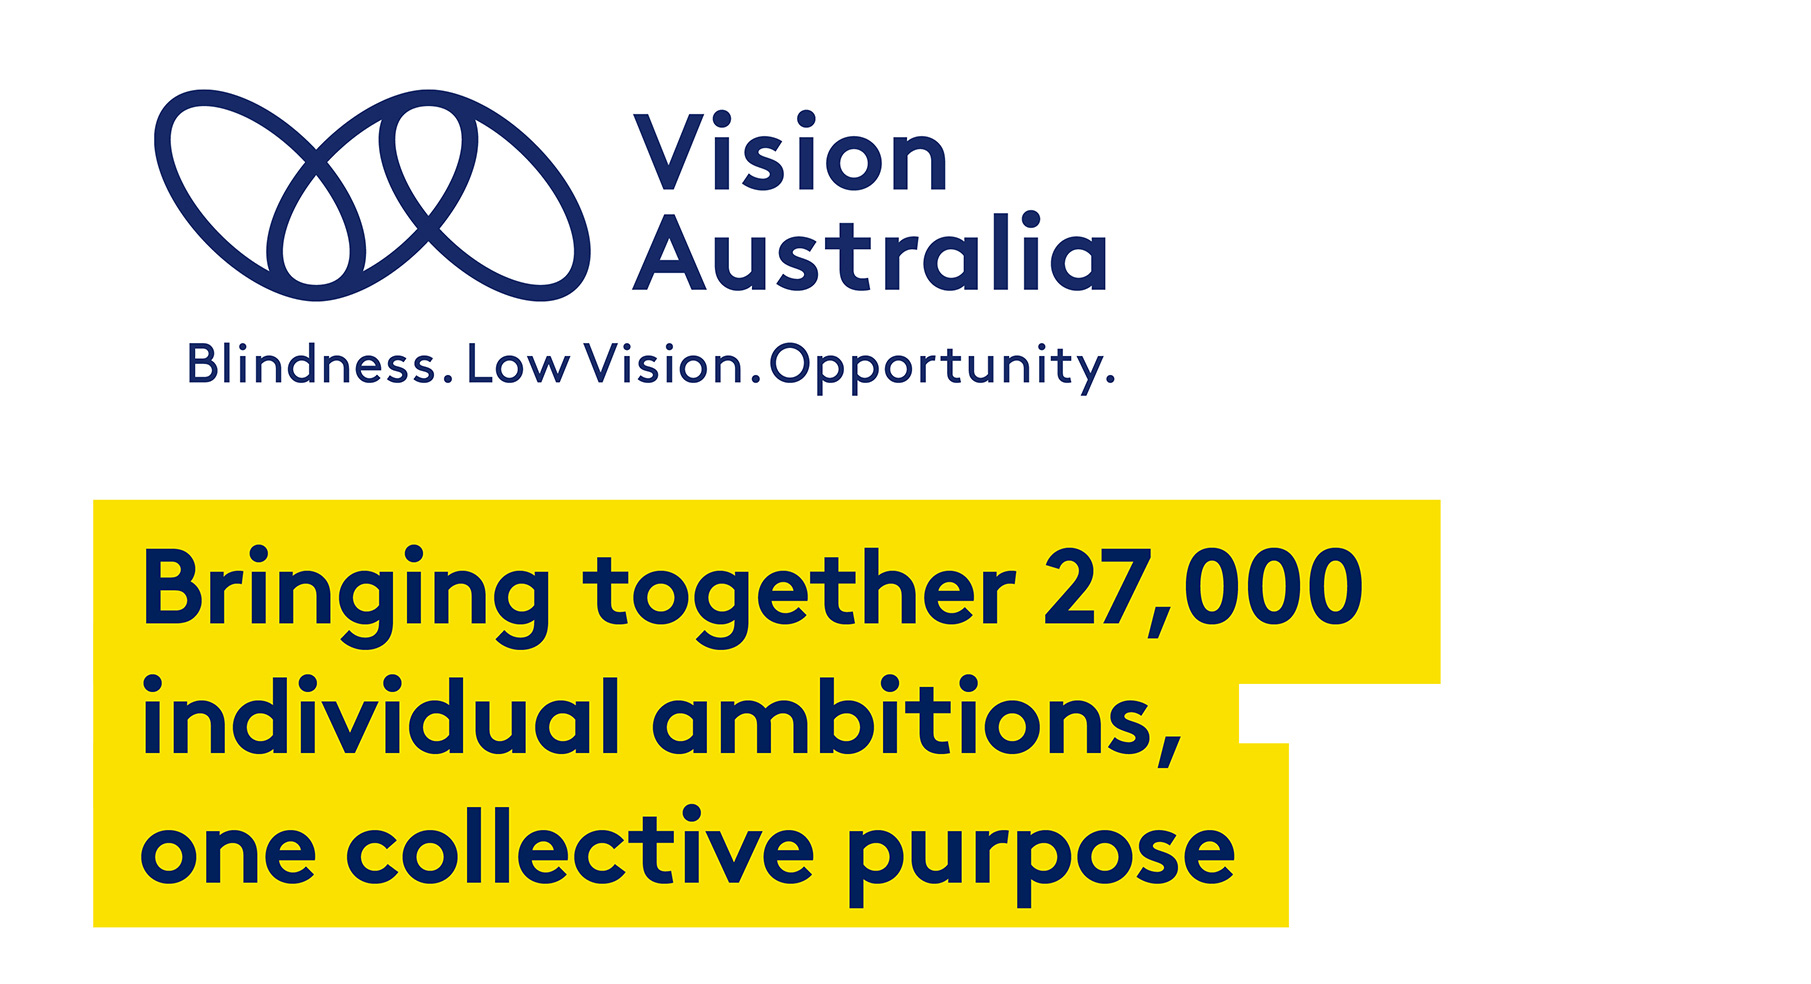 Vision Australia logo. Tagline: Blindness. Low Vision. Opportunity. Text reads: bringing together 27,000 individual ambitions, one collective purpose.